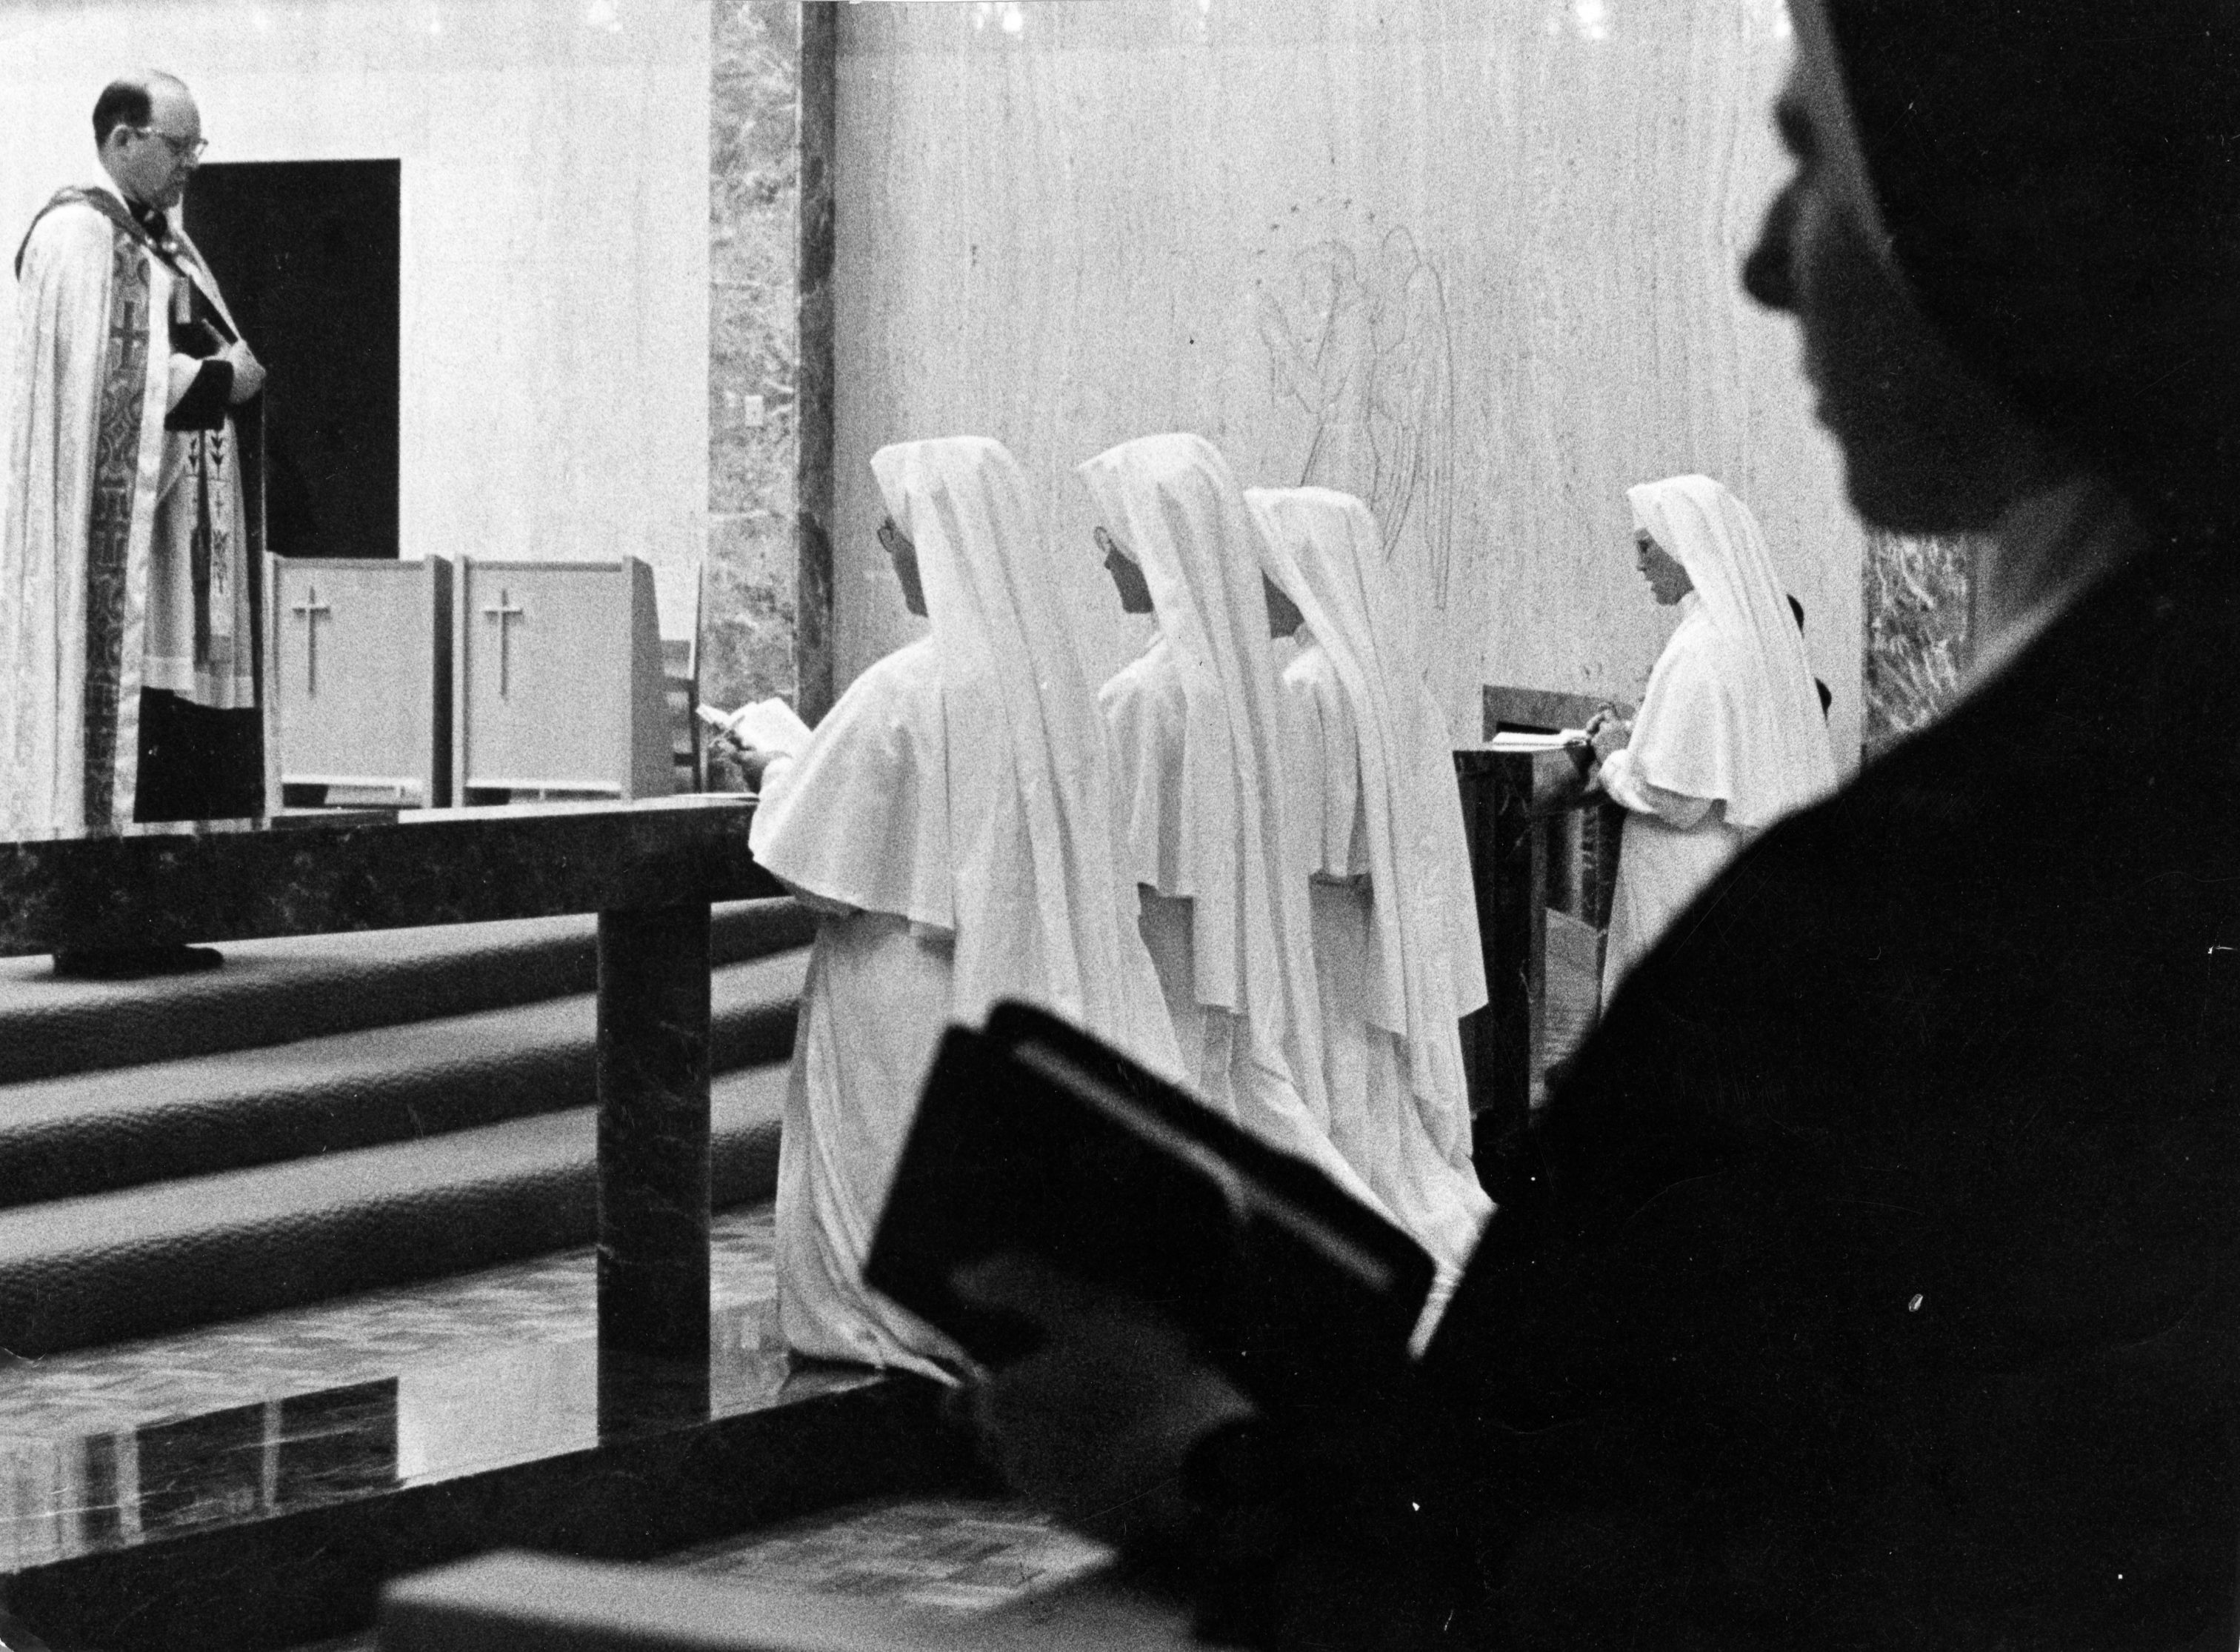 The School Sisters of Notre Dame established a convent in Elm Grove in 1855. The members of the order pictured here in 1966 are preparing for a trip to Paraguay.